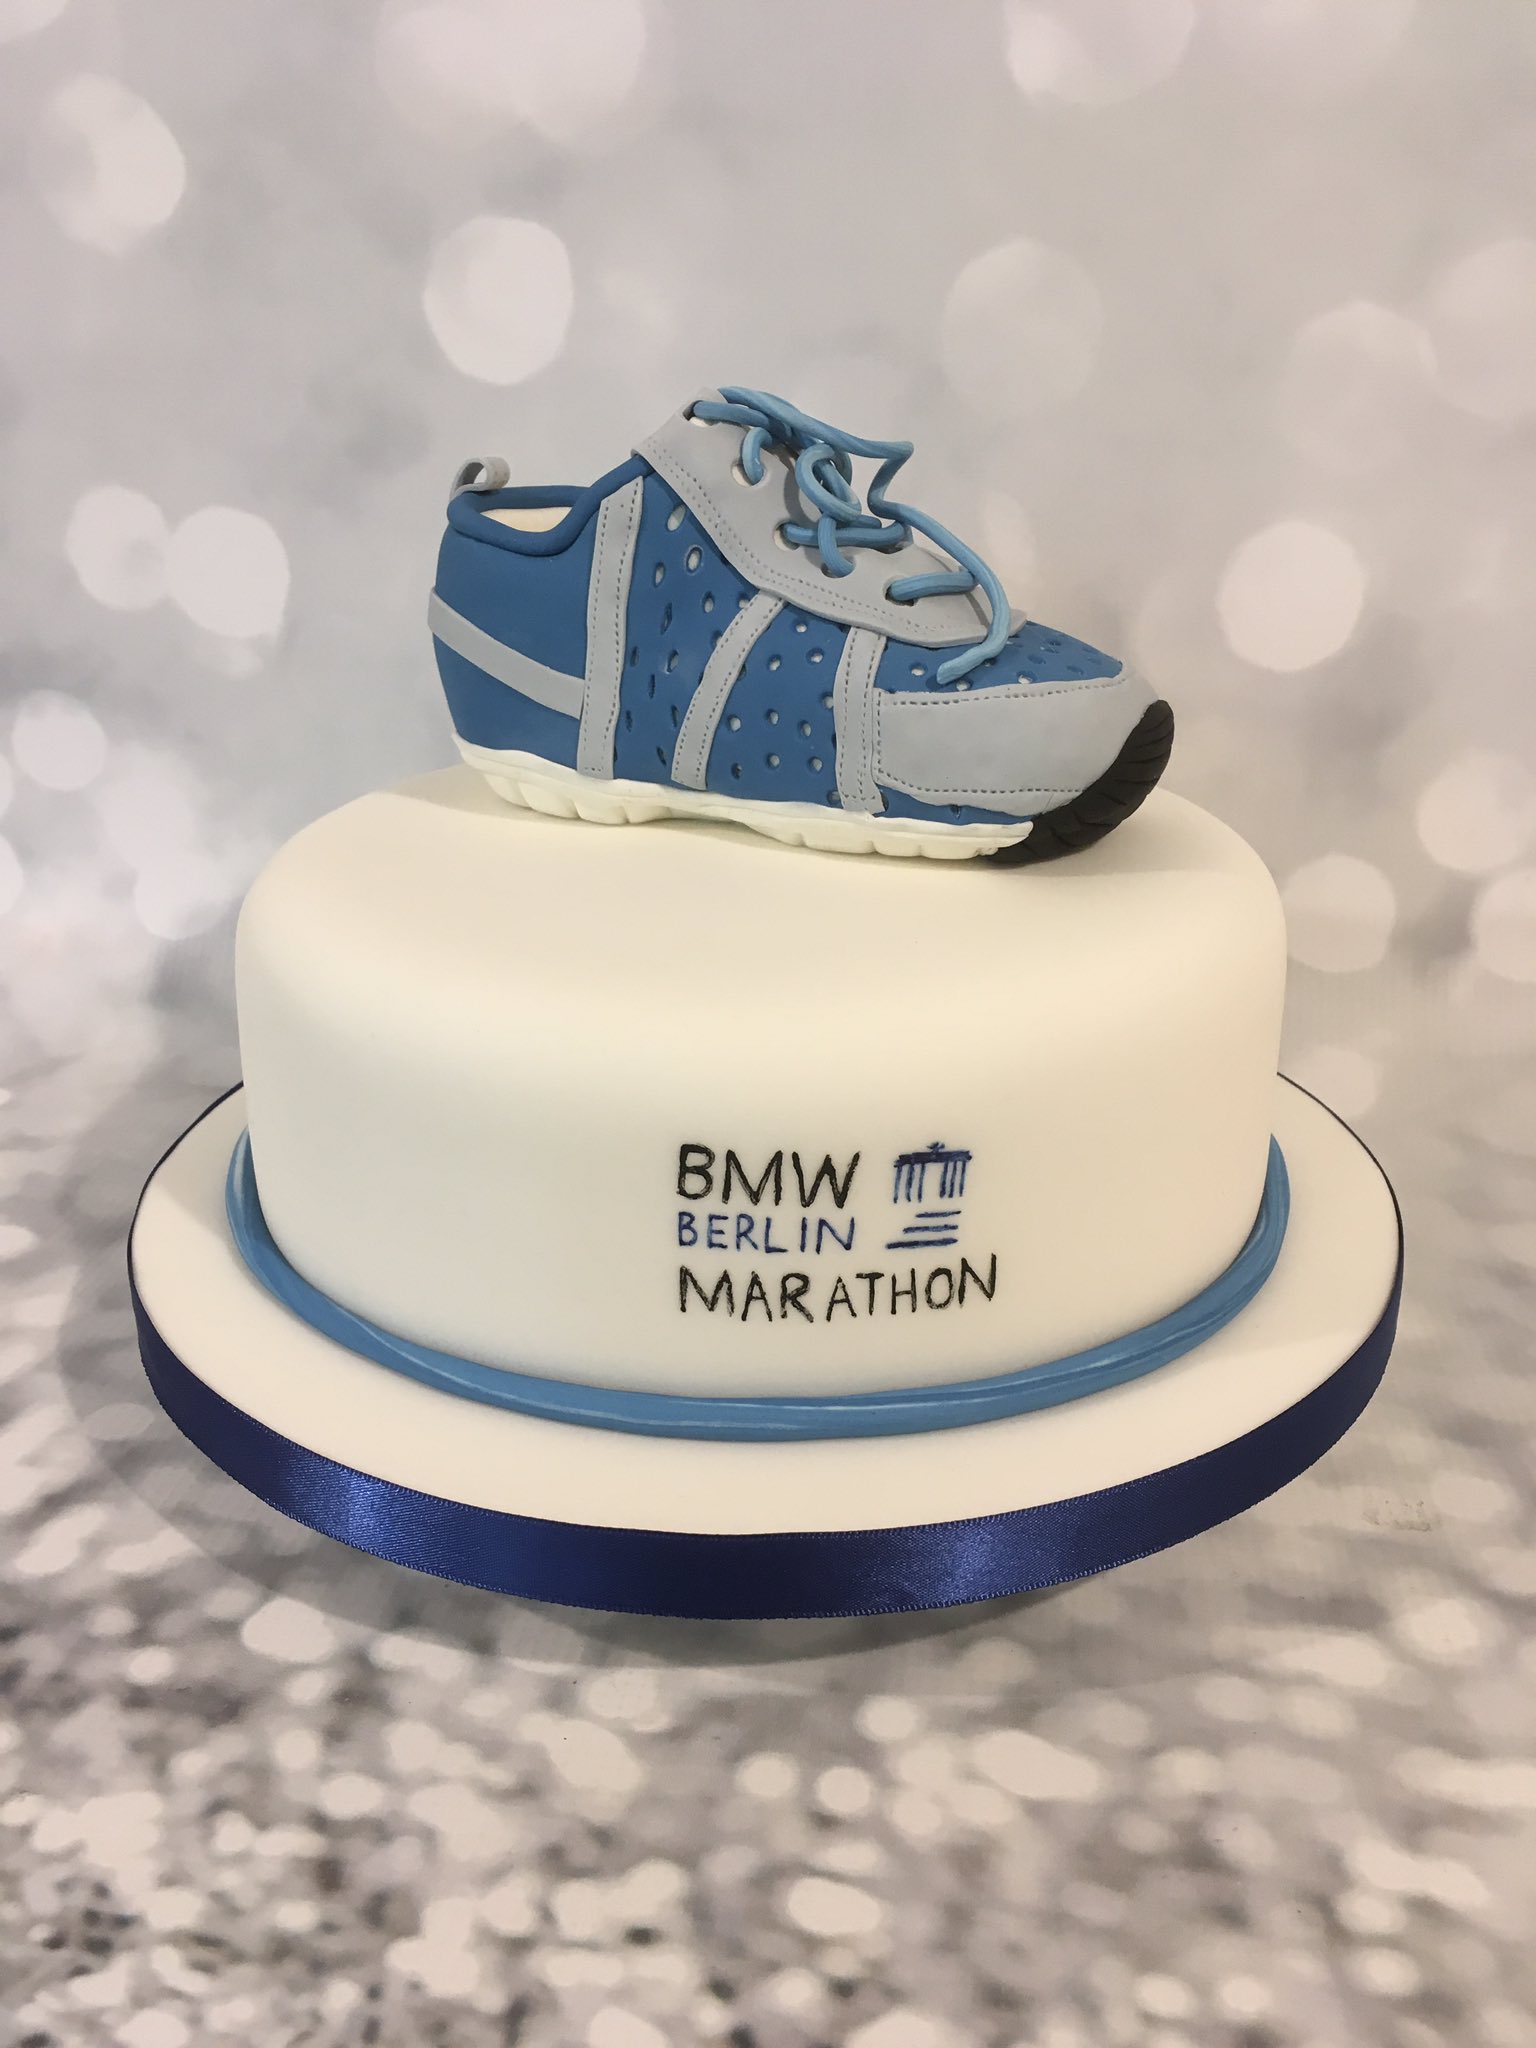 Cakes by Cathie on X: Anyone training for the #Berlin #marathon? All sugar  #trainer and a rich fruit cake for an event to raise funds for the runner -  not me!!